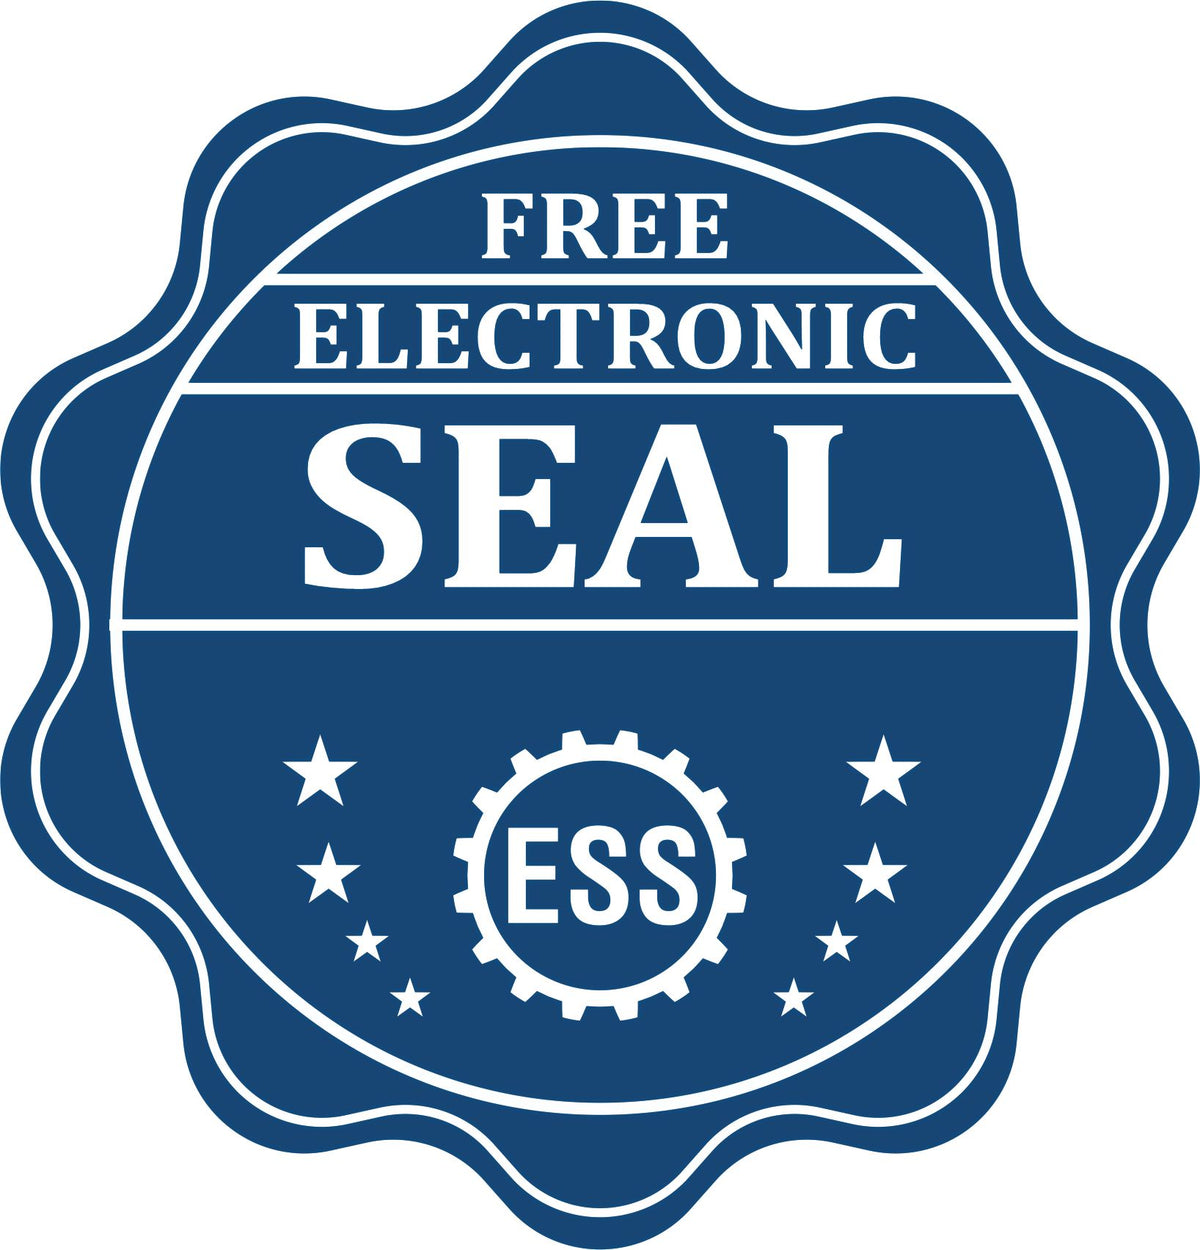 A badge showing a free electronic seal for the Long Reach Mississippi Geology Seal with stars and the ESS gear on the emblem.